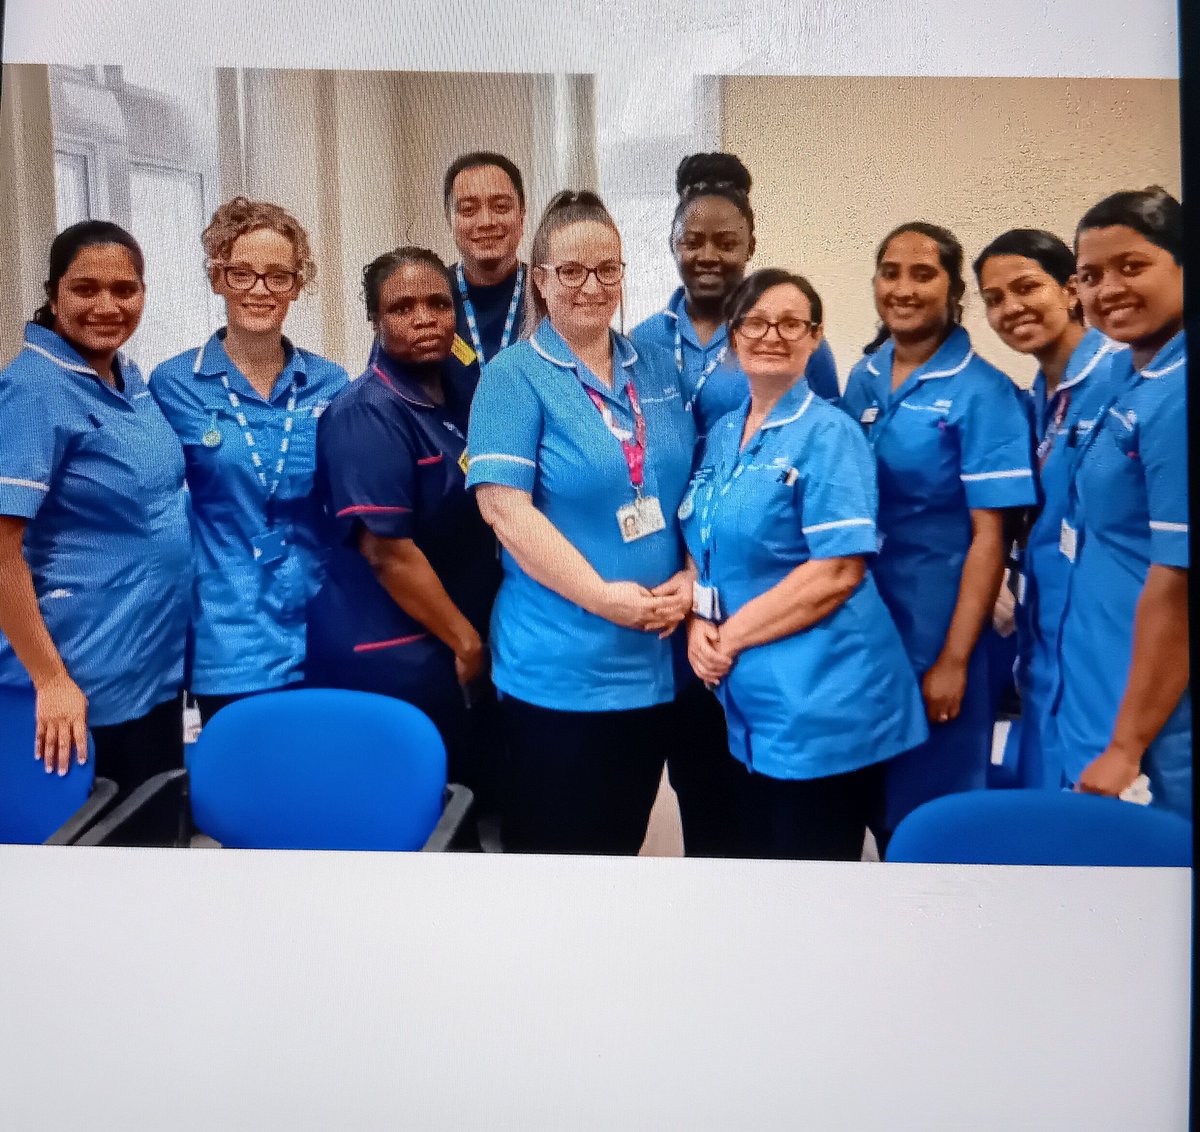 Meet Cohort 1: Sister Leadership Programme @NorthMcrGH_NHS - final day today spent celebrating all that they have achieved over the last 4 months-thank you to each of you for your contribution, commitment, willingness to listen and learn from others 👏 @LeonardLero @AkweiChrissy